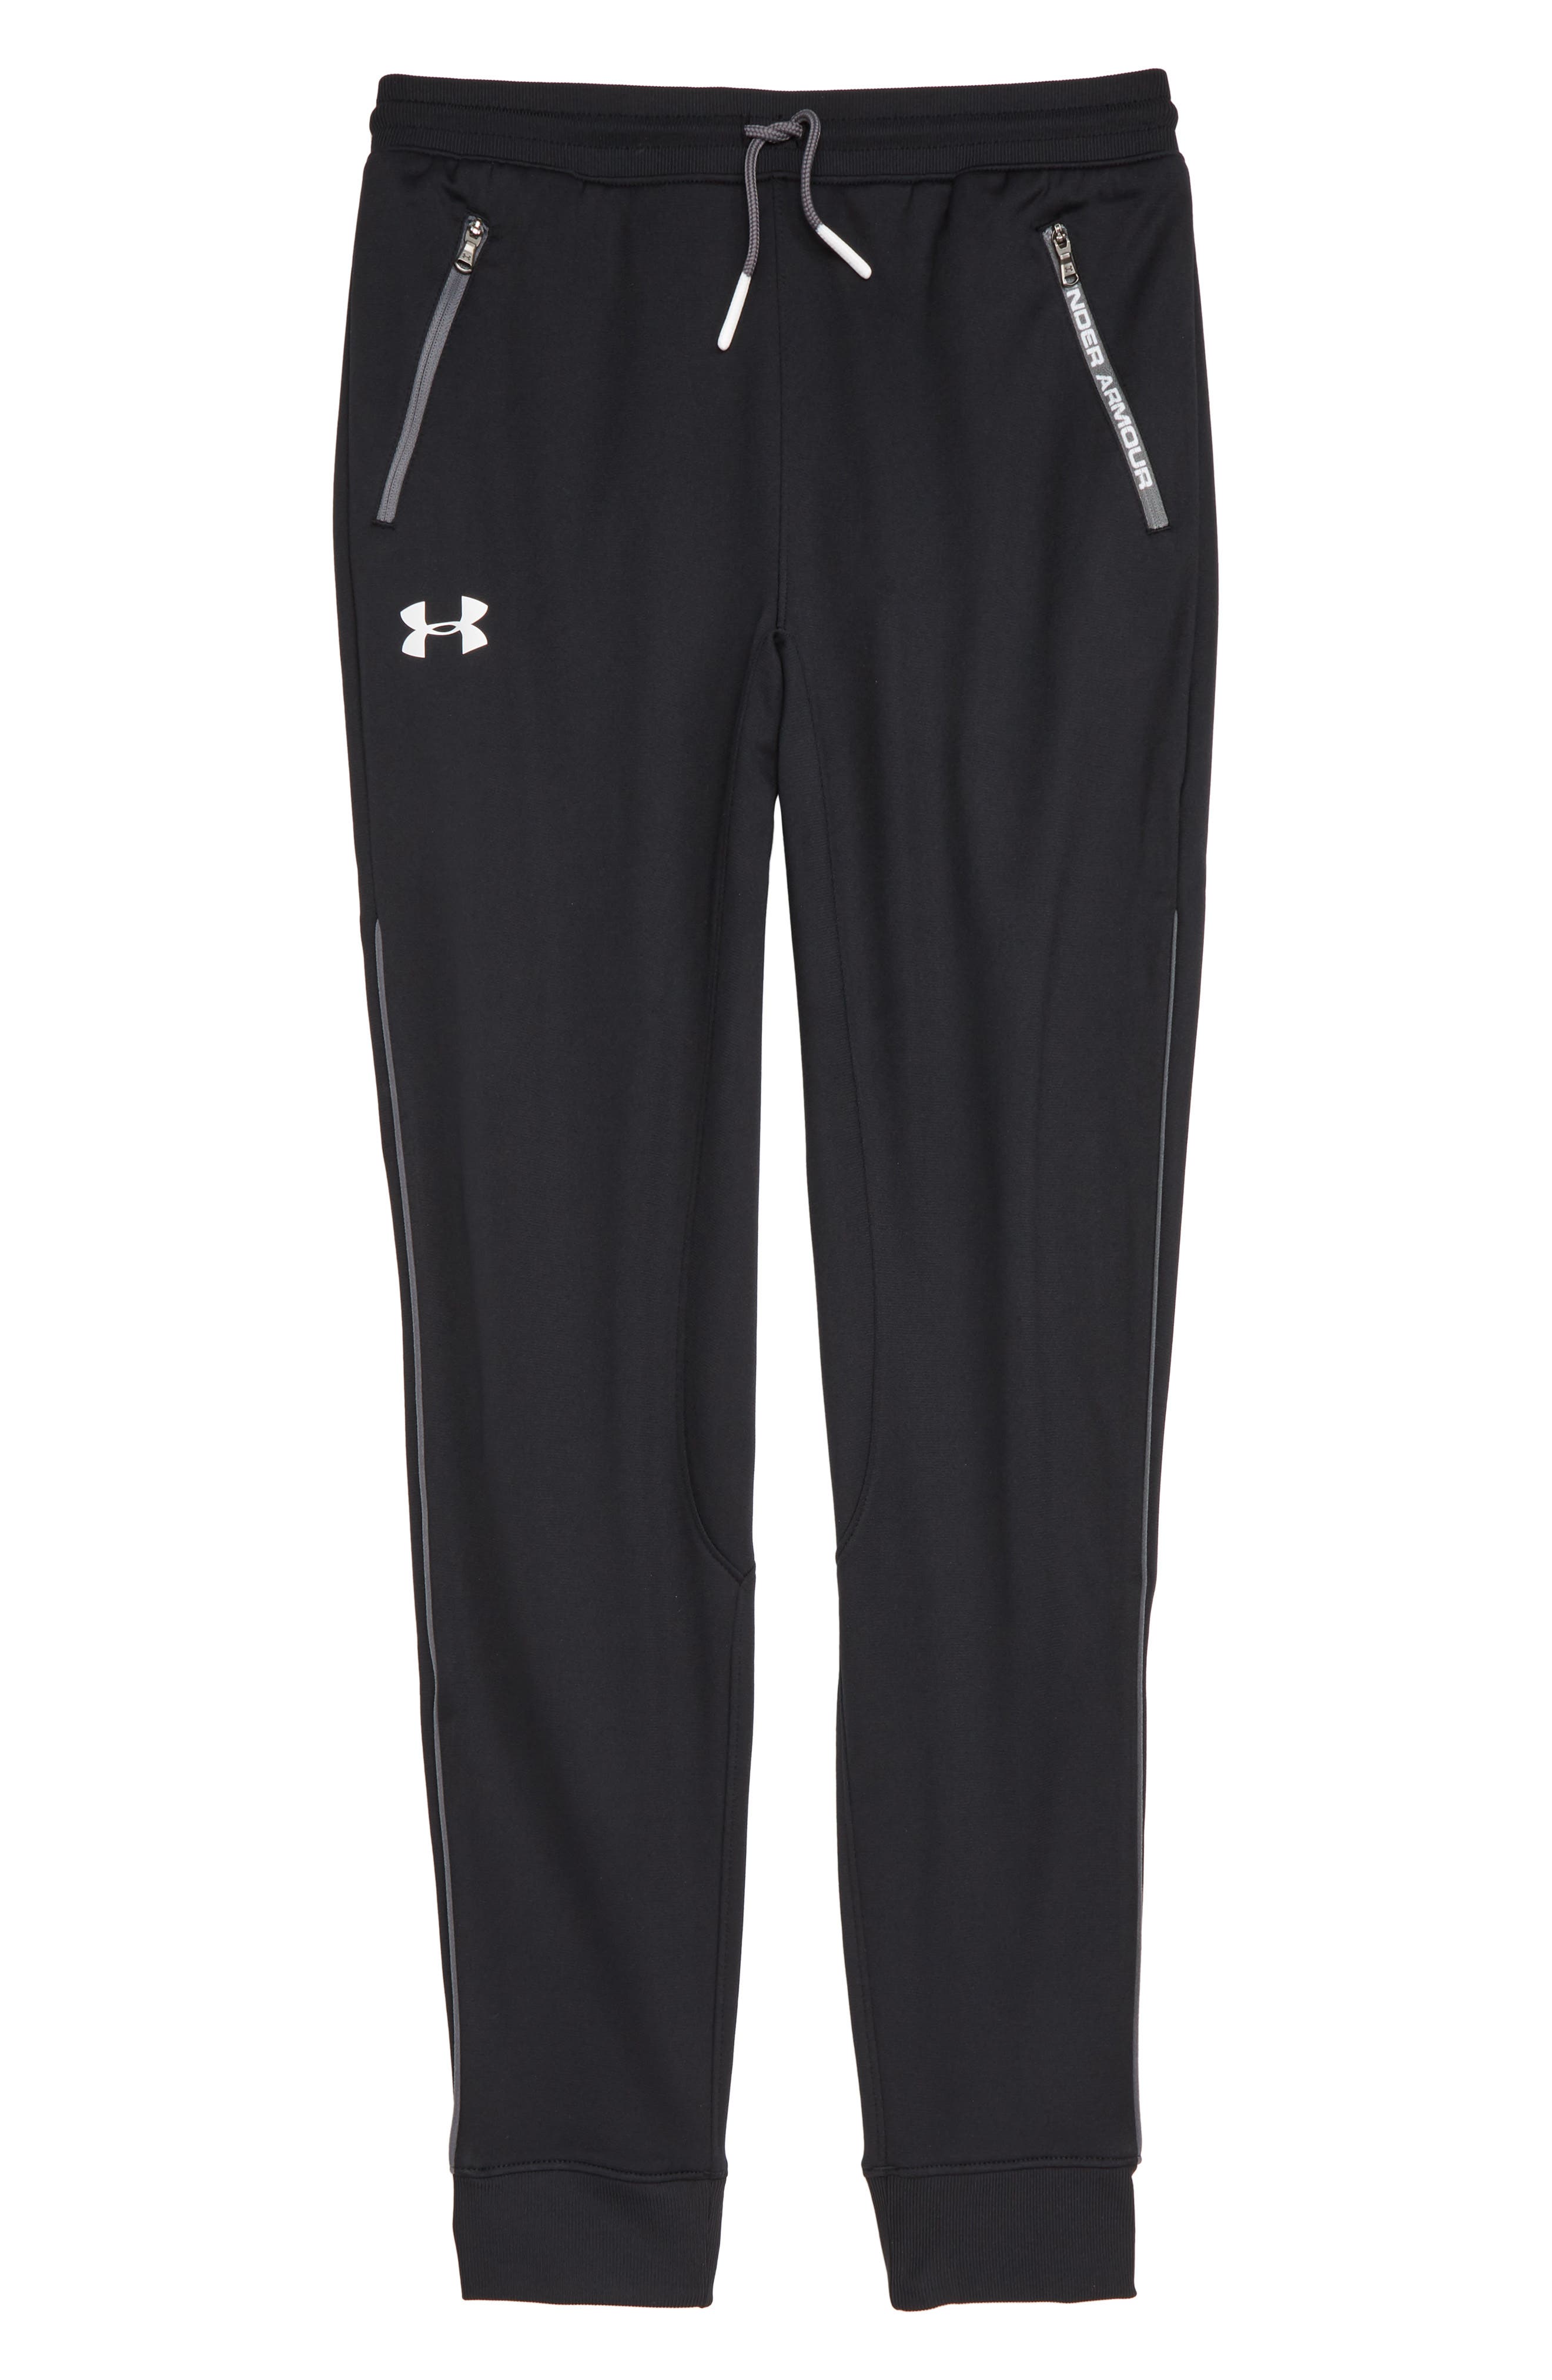 Under Armour Pennant Tapered Sweatpants 